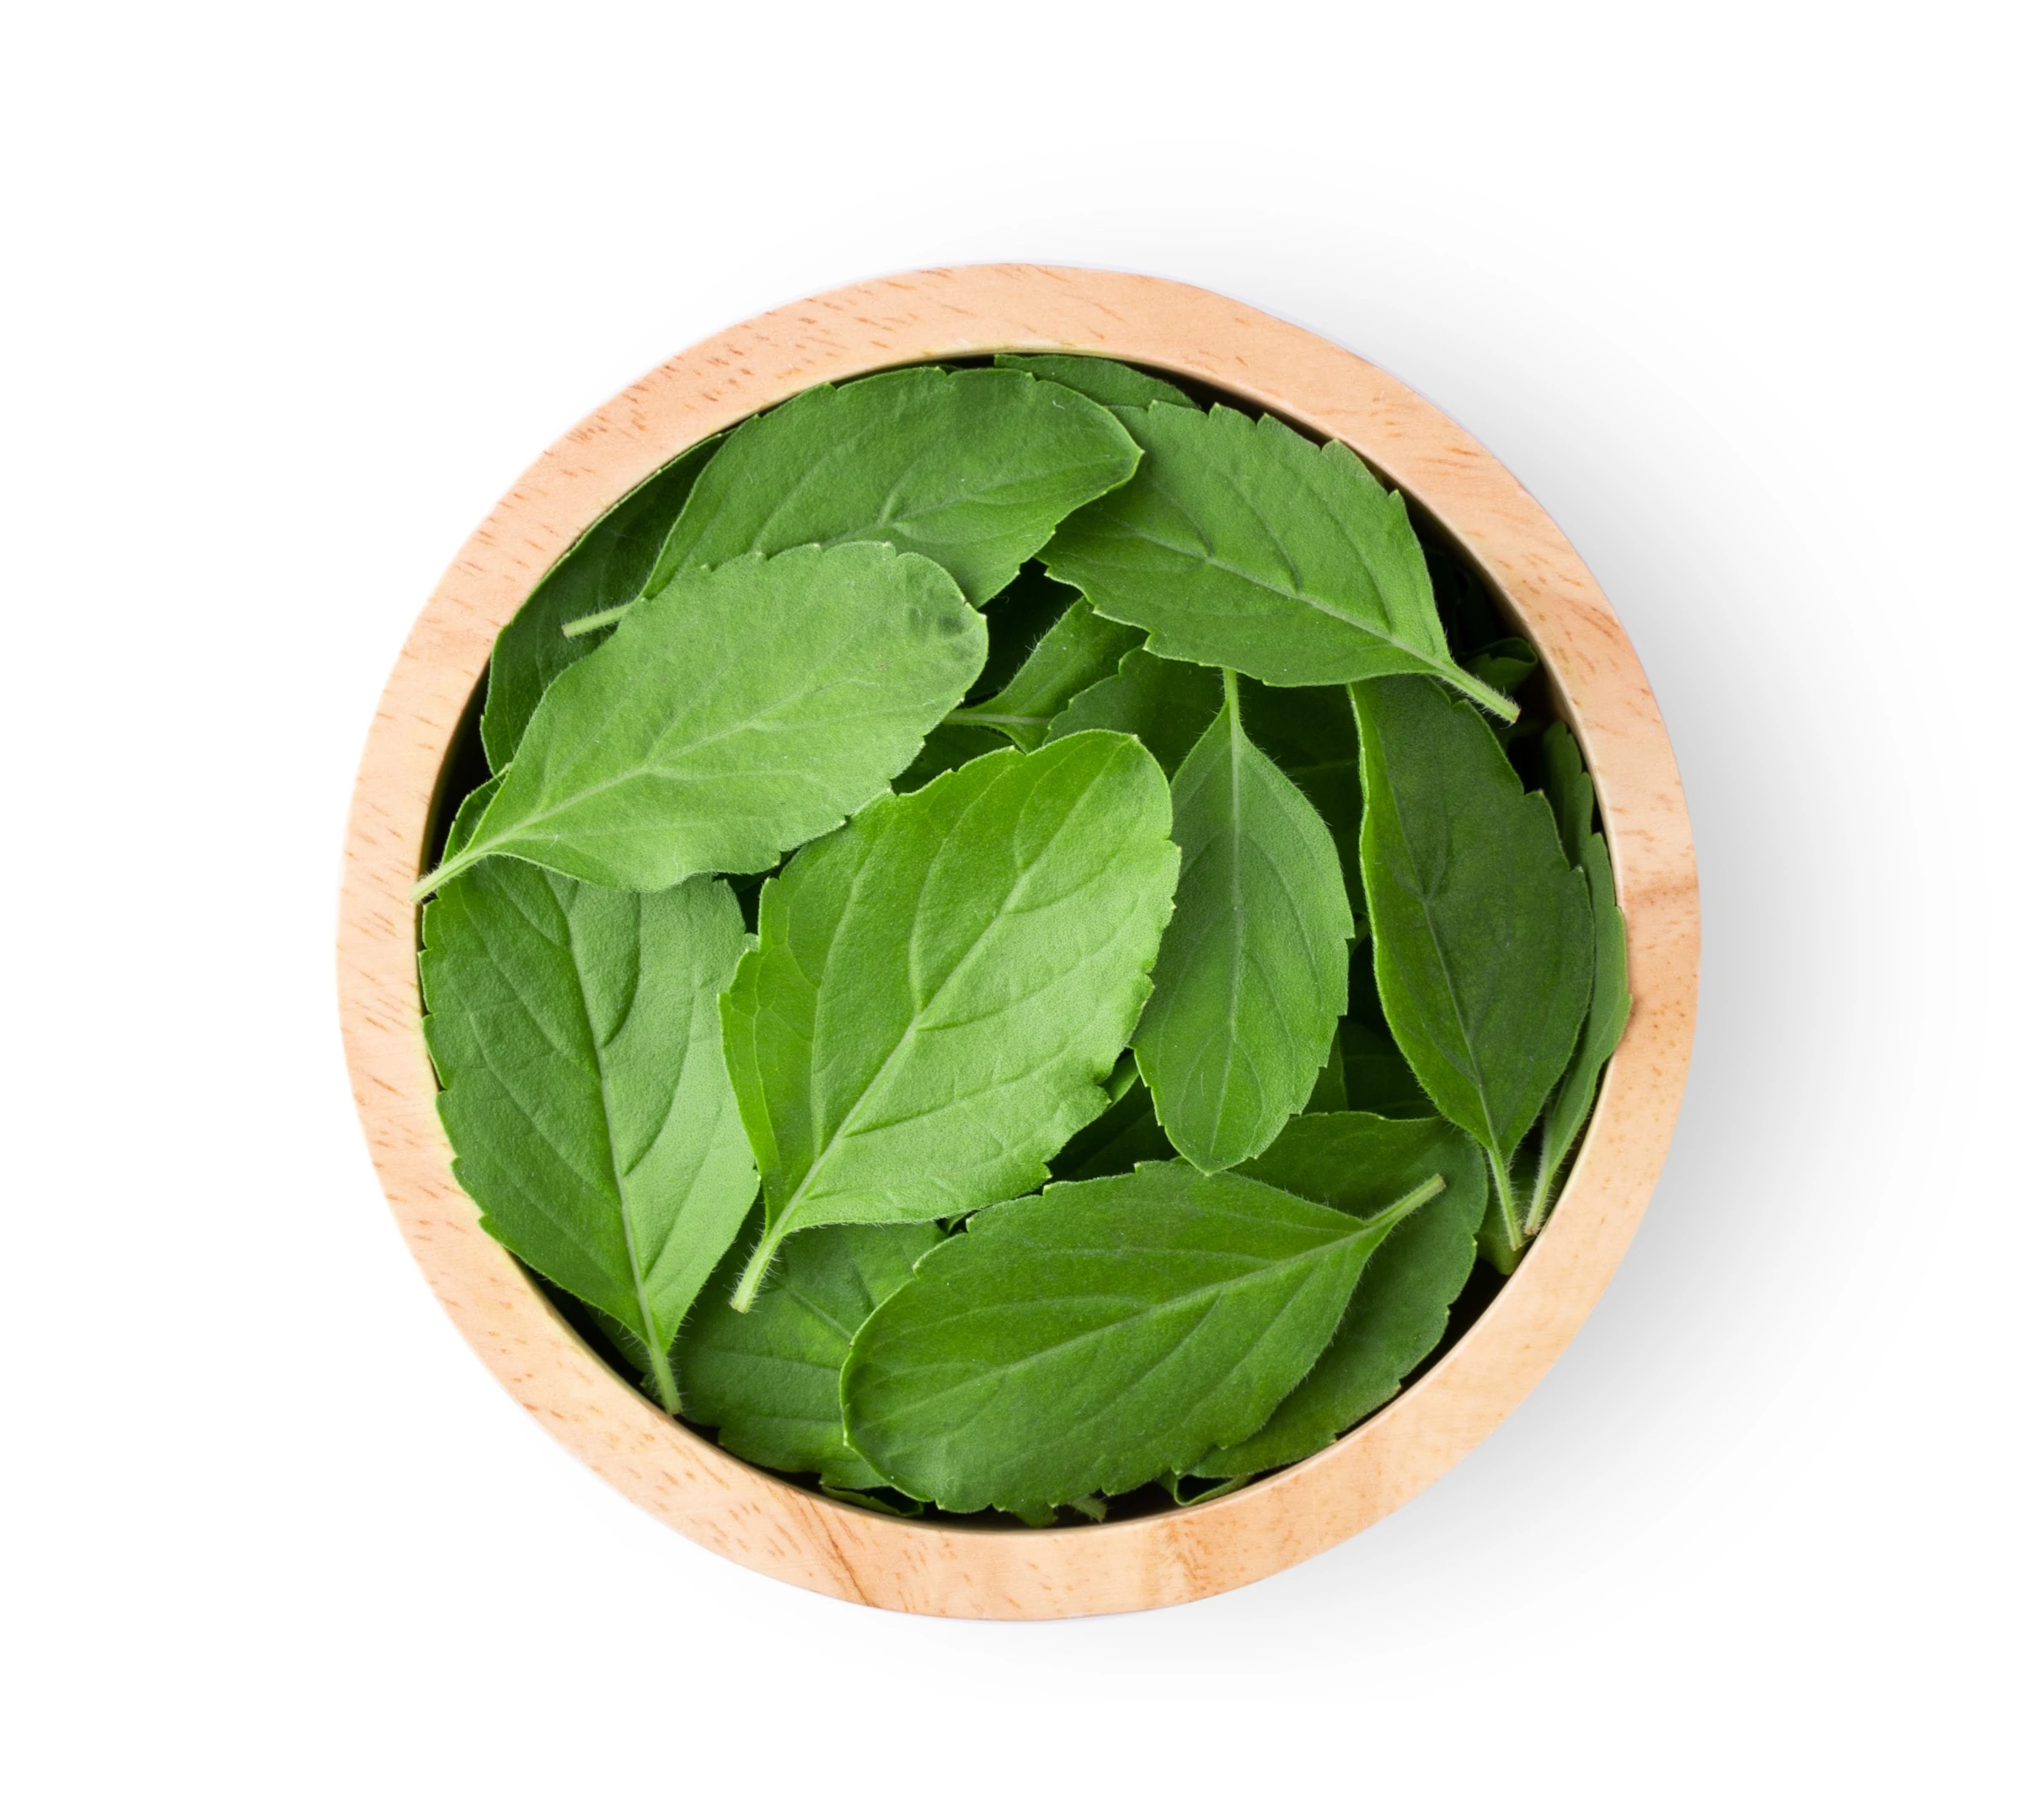 Basil leaves in wooden bowl on white table